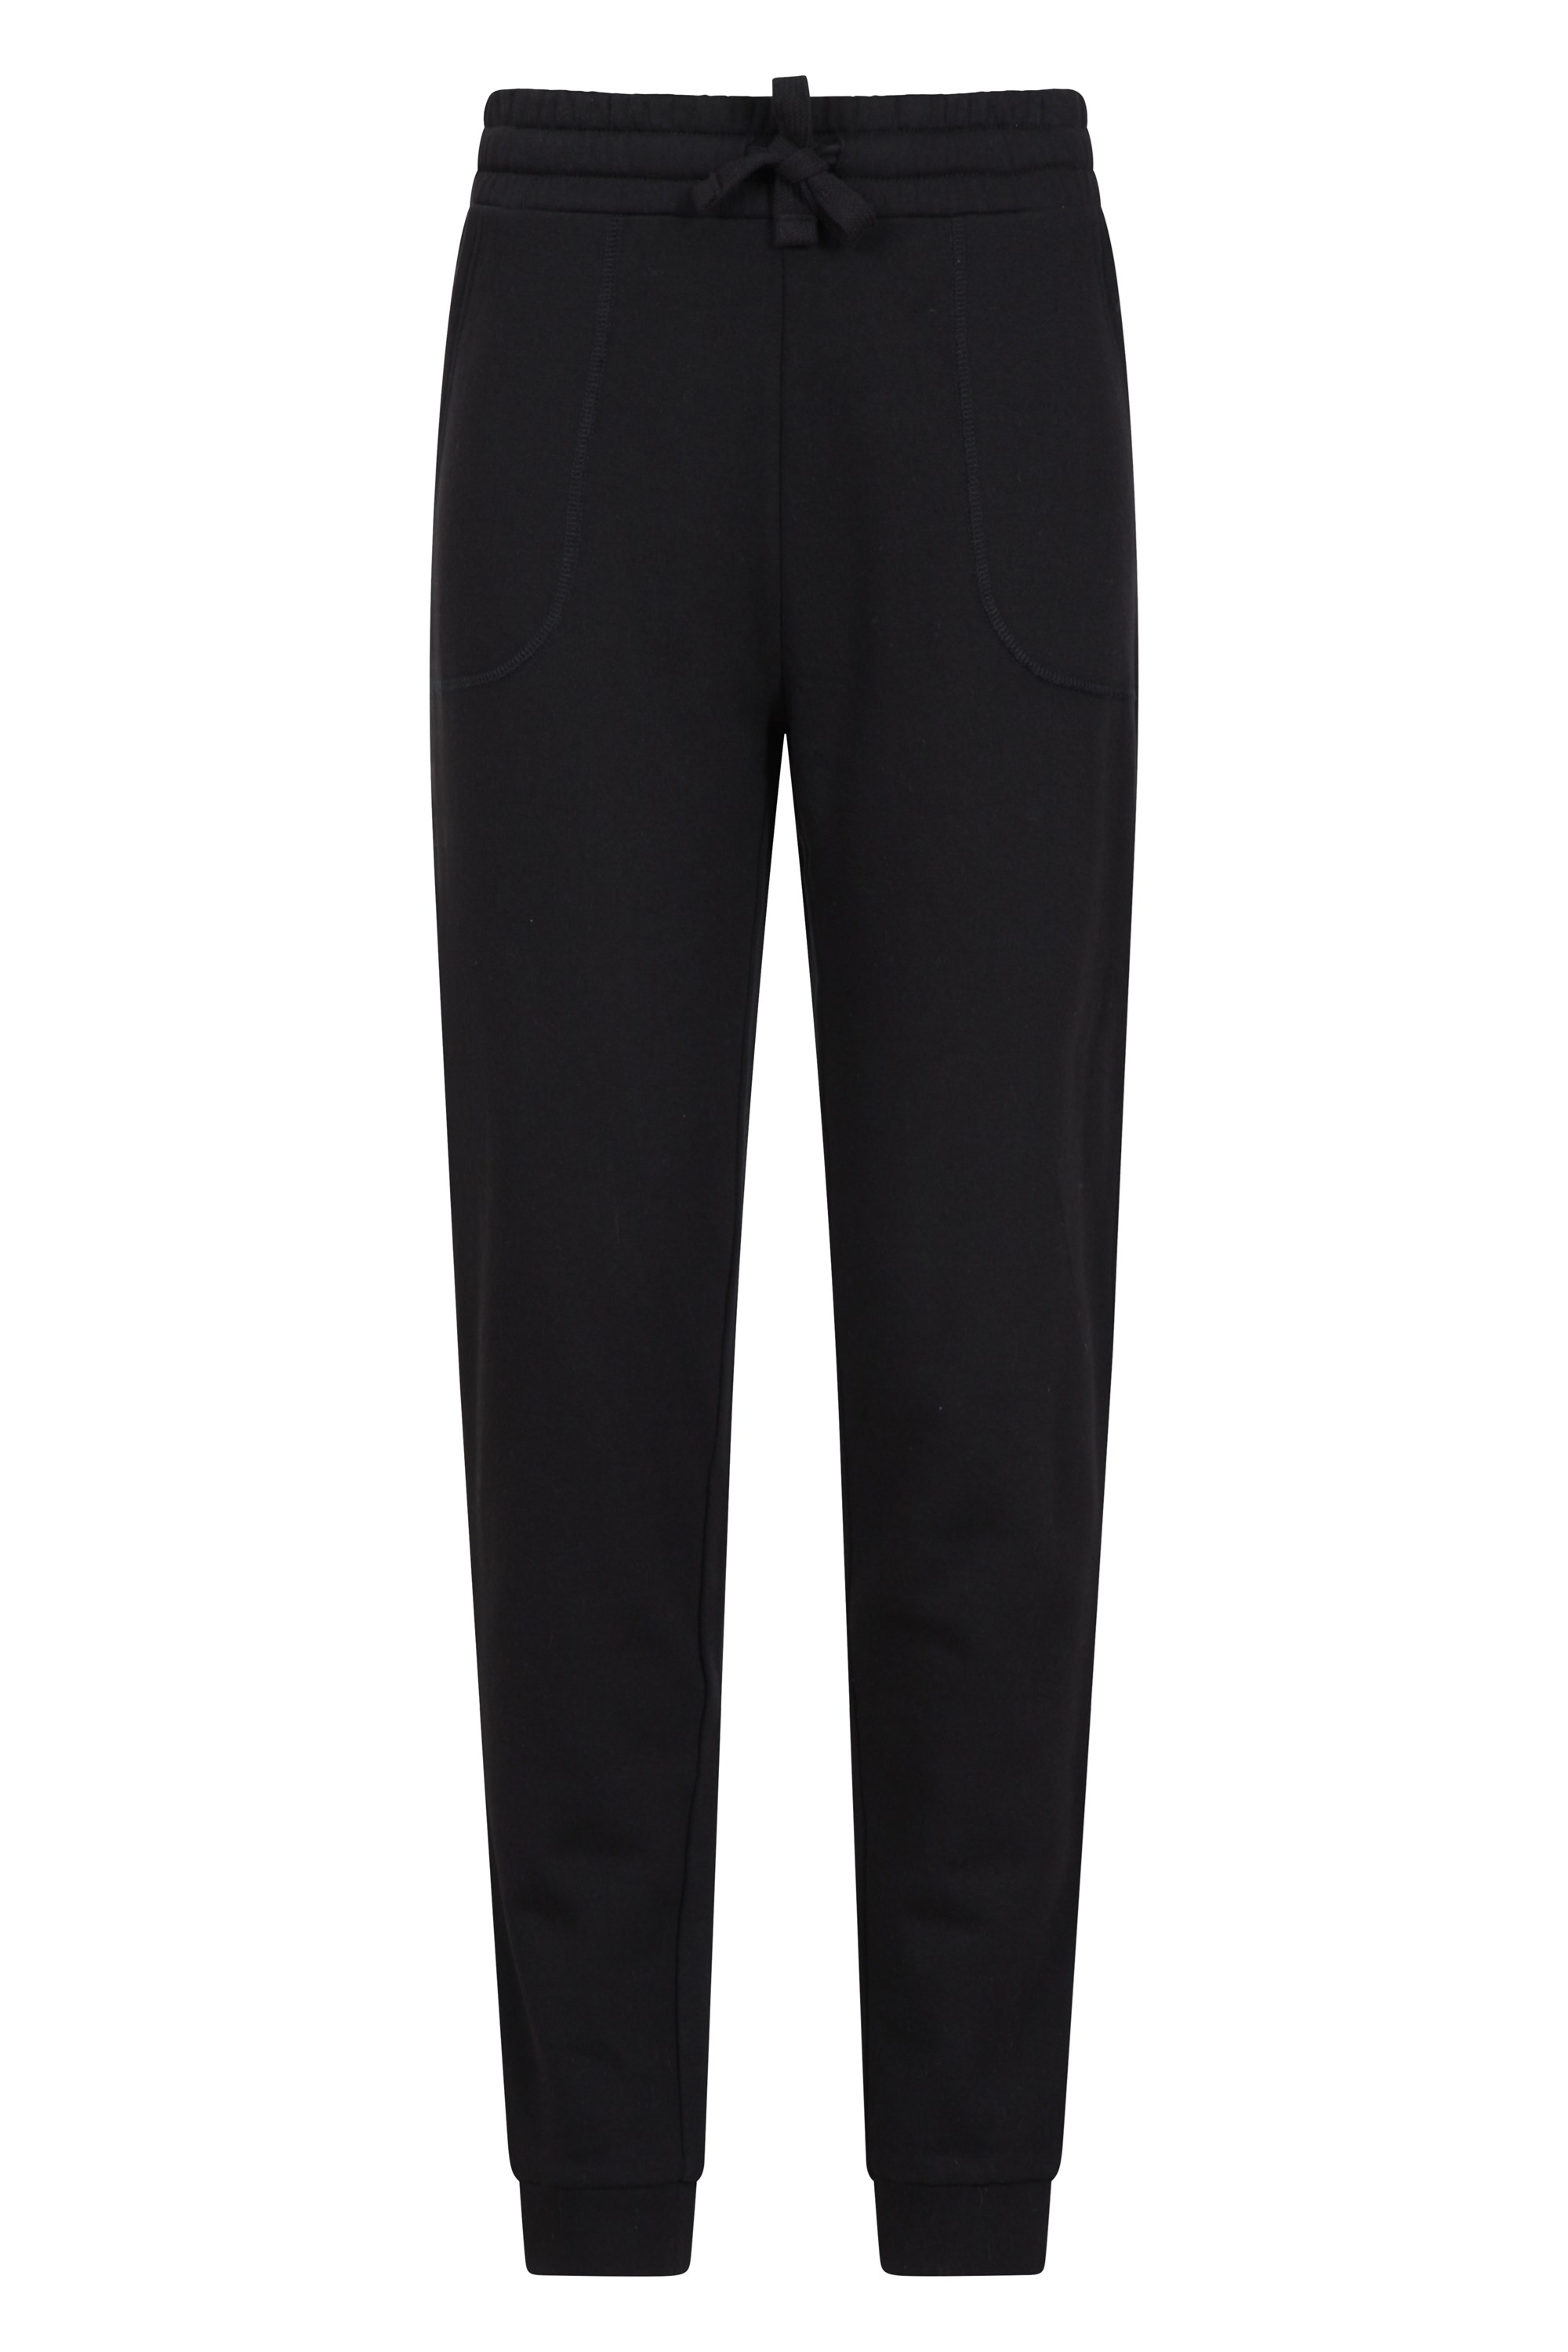 Luxe Womens Cosy Sweatpants | Mountain Warehouse GB